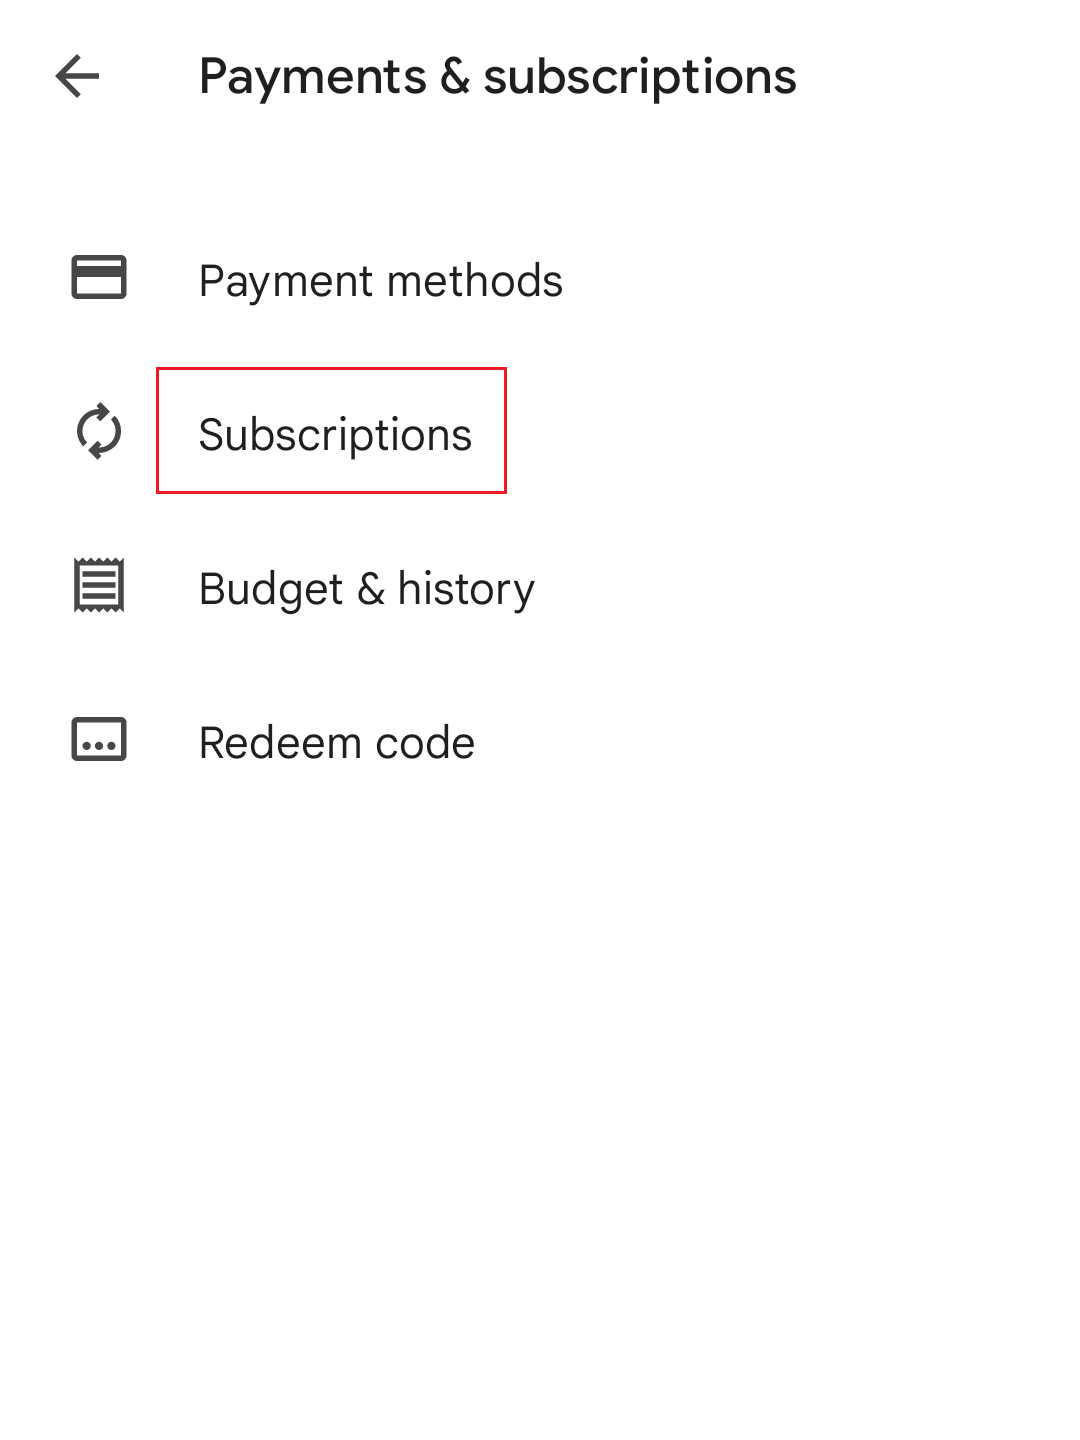 Select Subscriptions